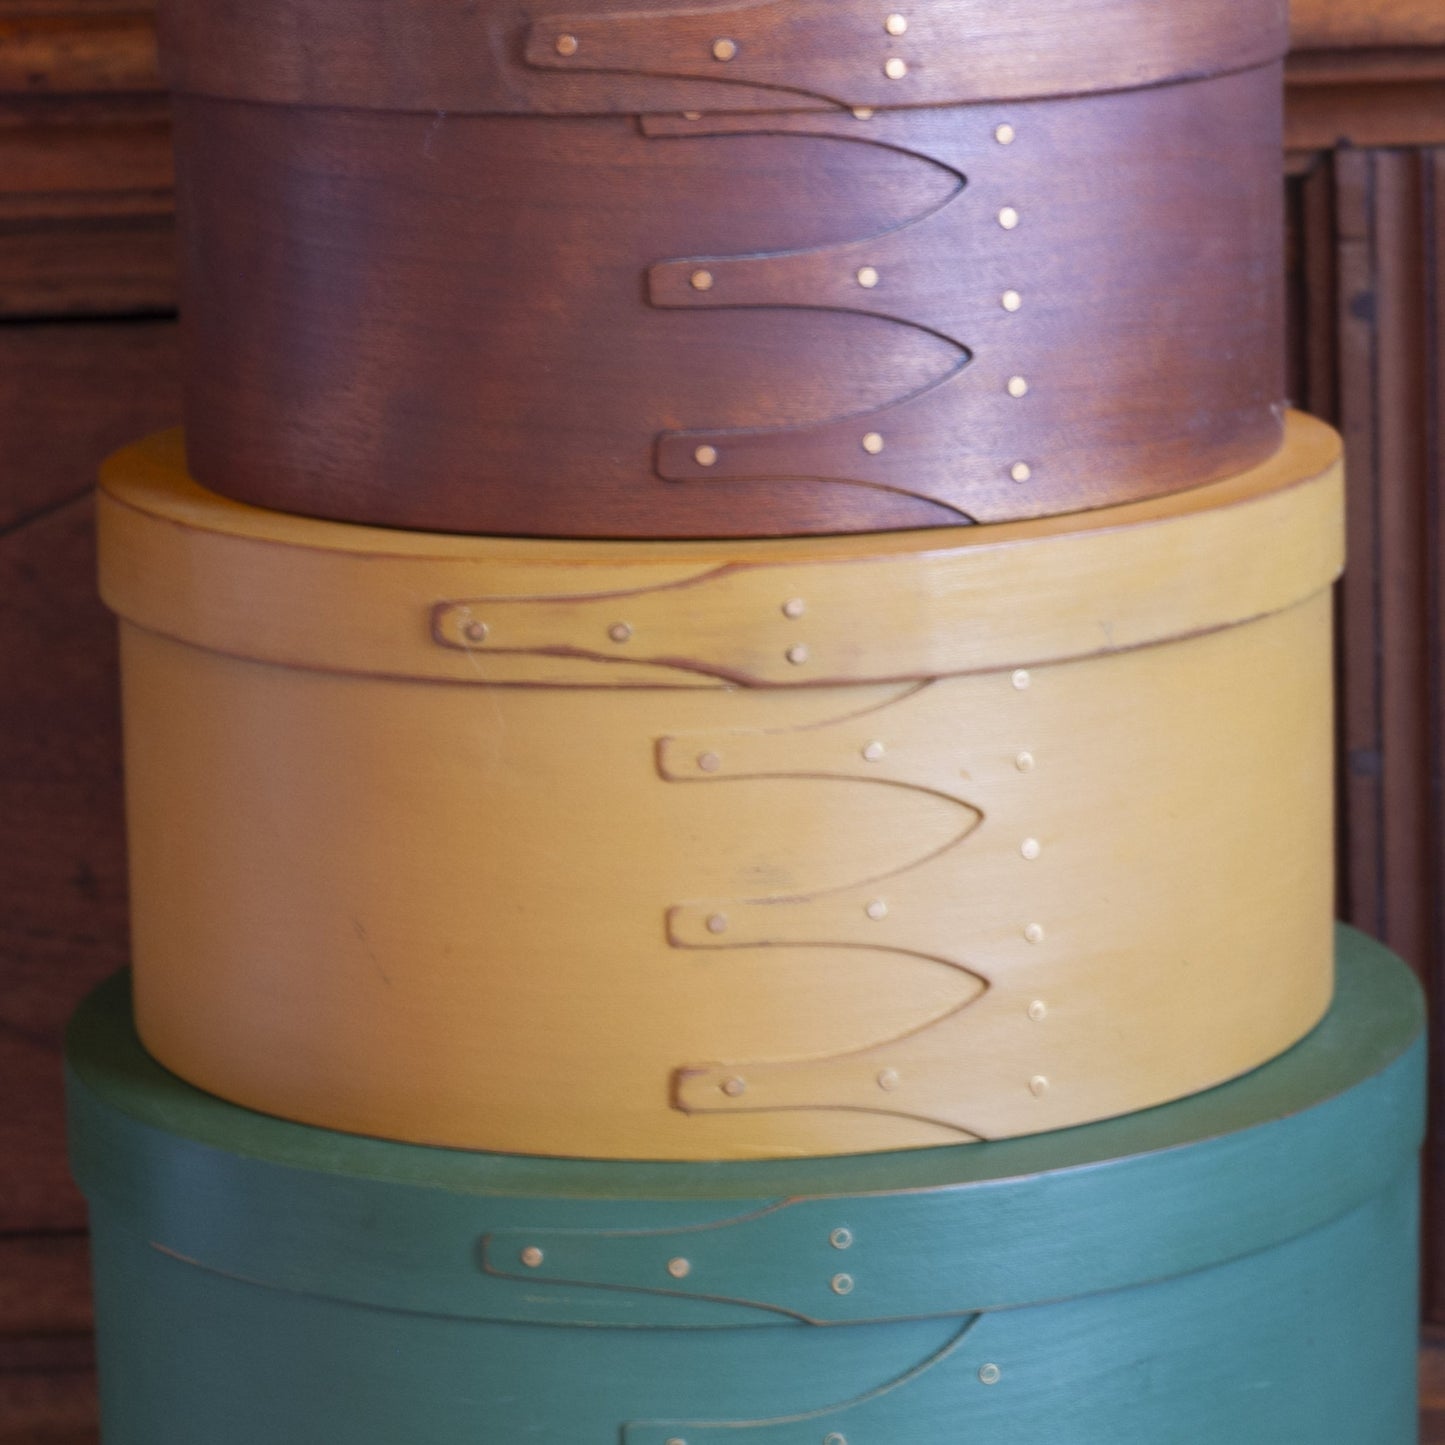 SHAKER-STYLE SWALLOW TAIL JOINTED Circular Nesting Boxes Set of Nine (9)